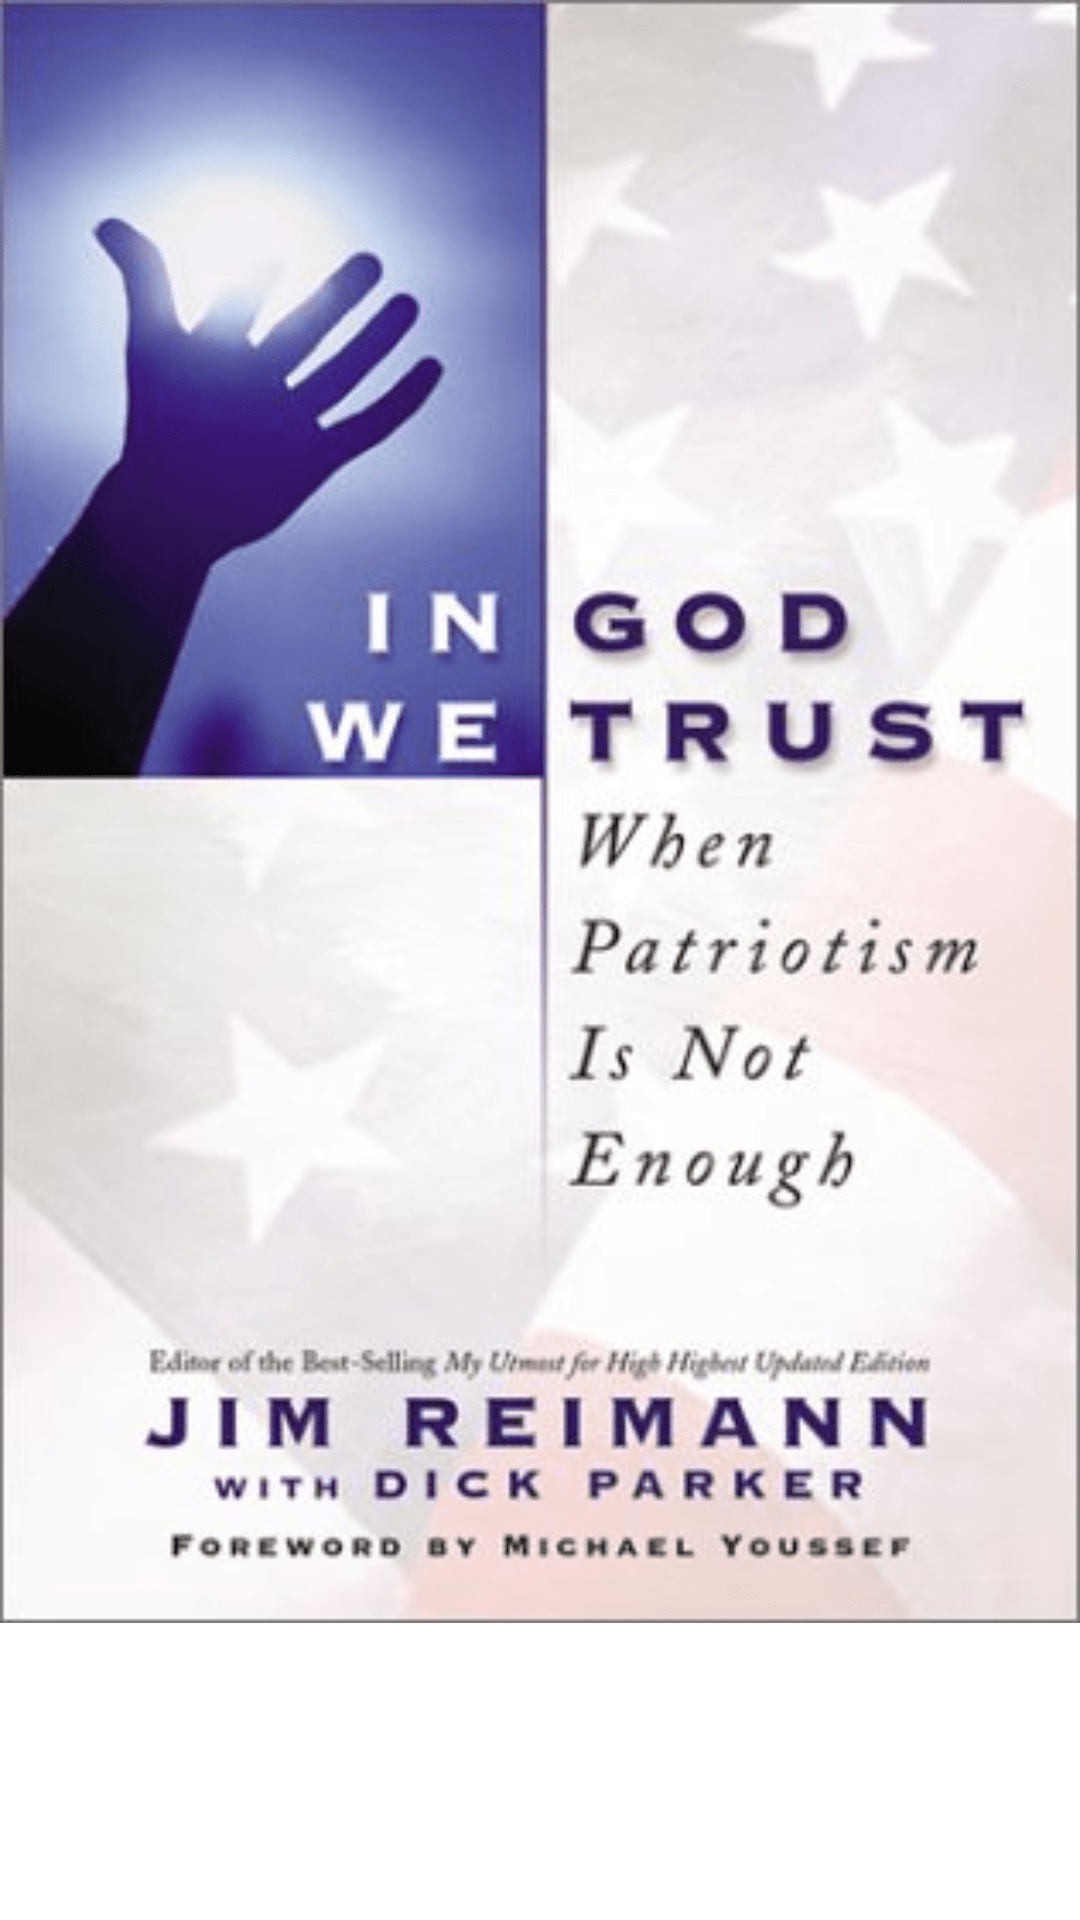 In God We Trust: When Patriotism Is Not Enough